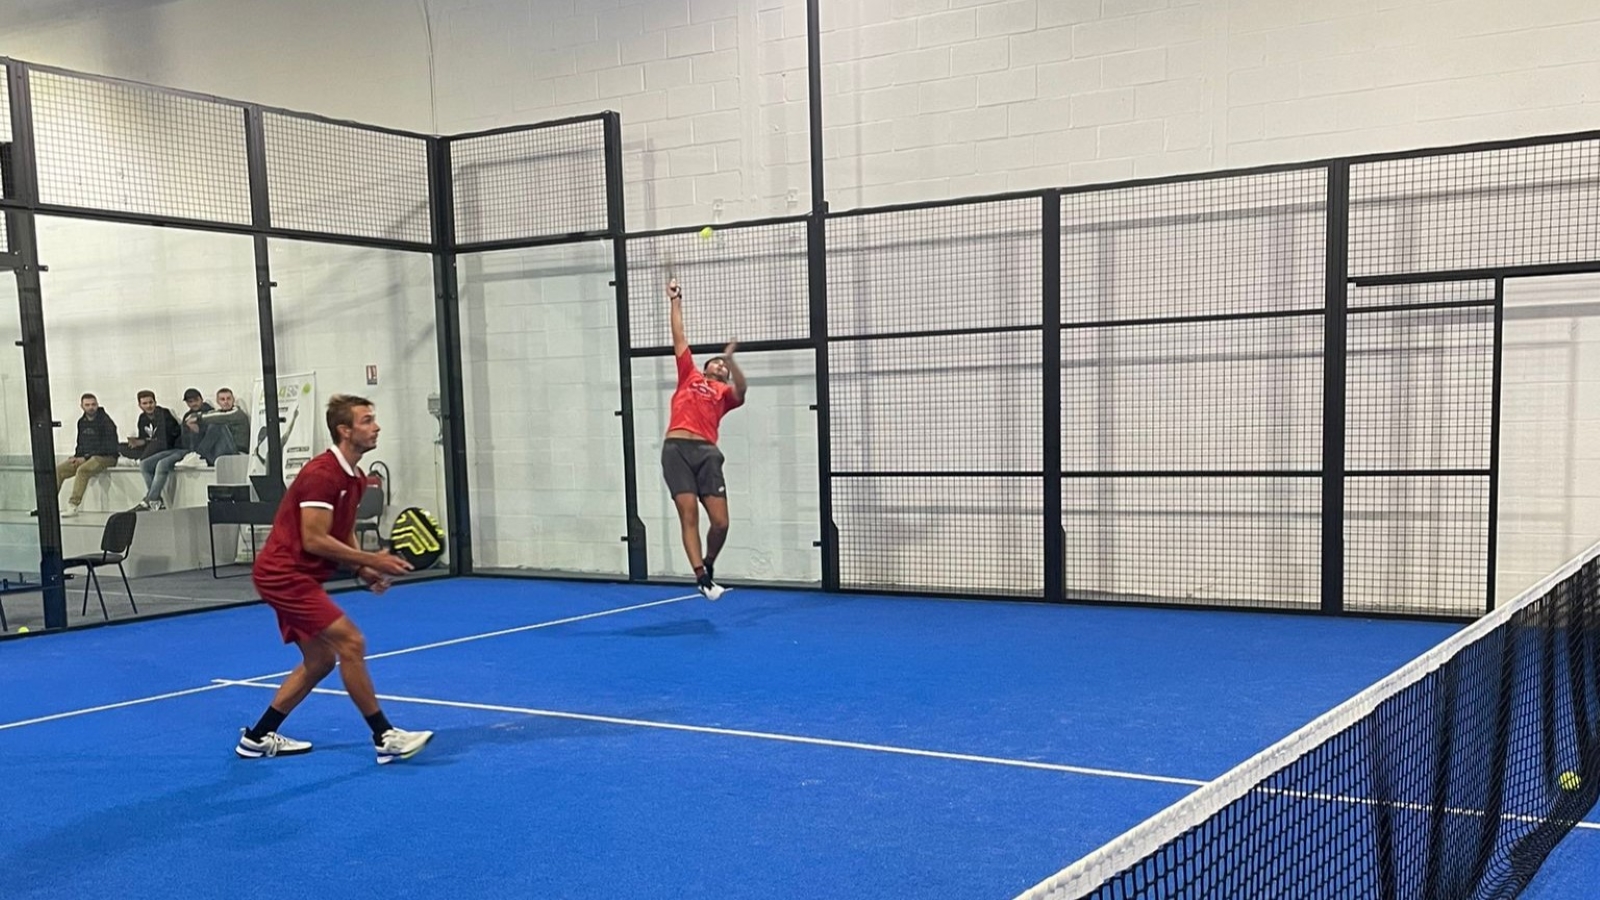 P1500 Padel Campus Arena – Foure / Hue eliminuje rozstawionych z numerem 2: Courrin / Moura